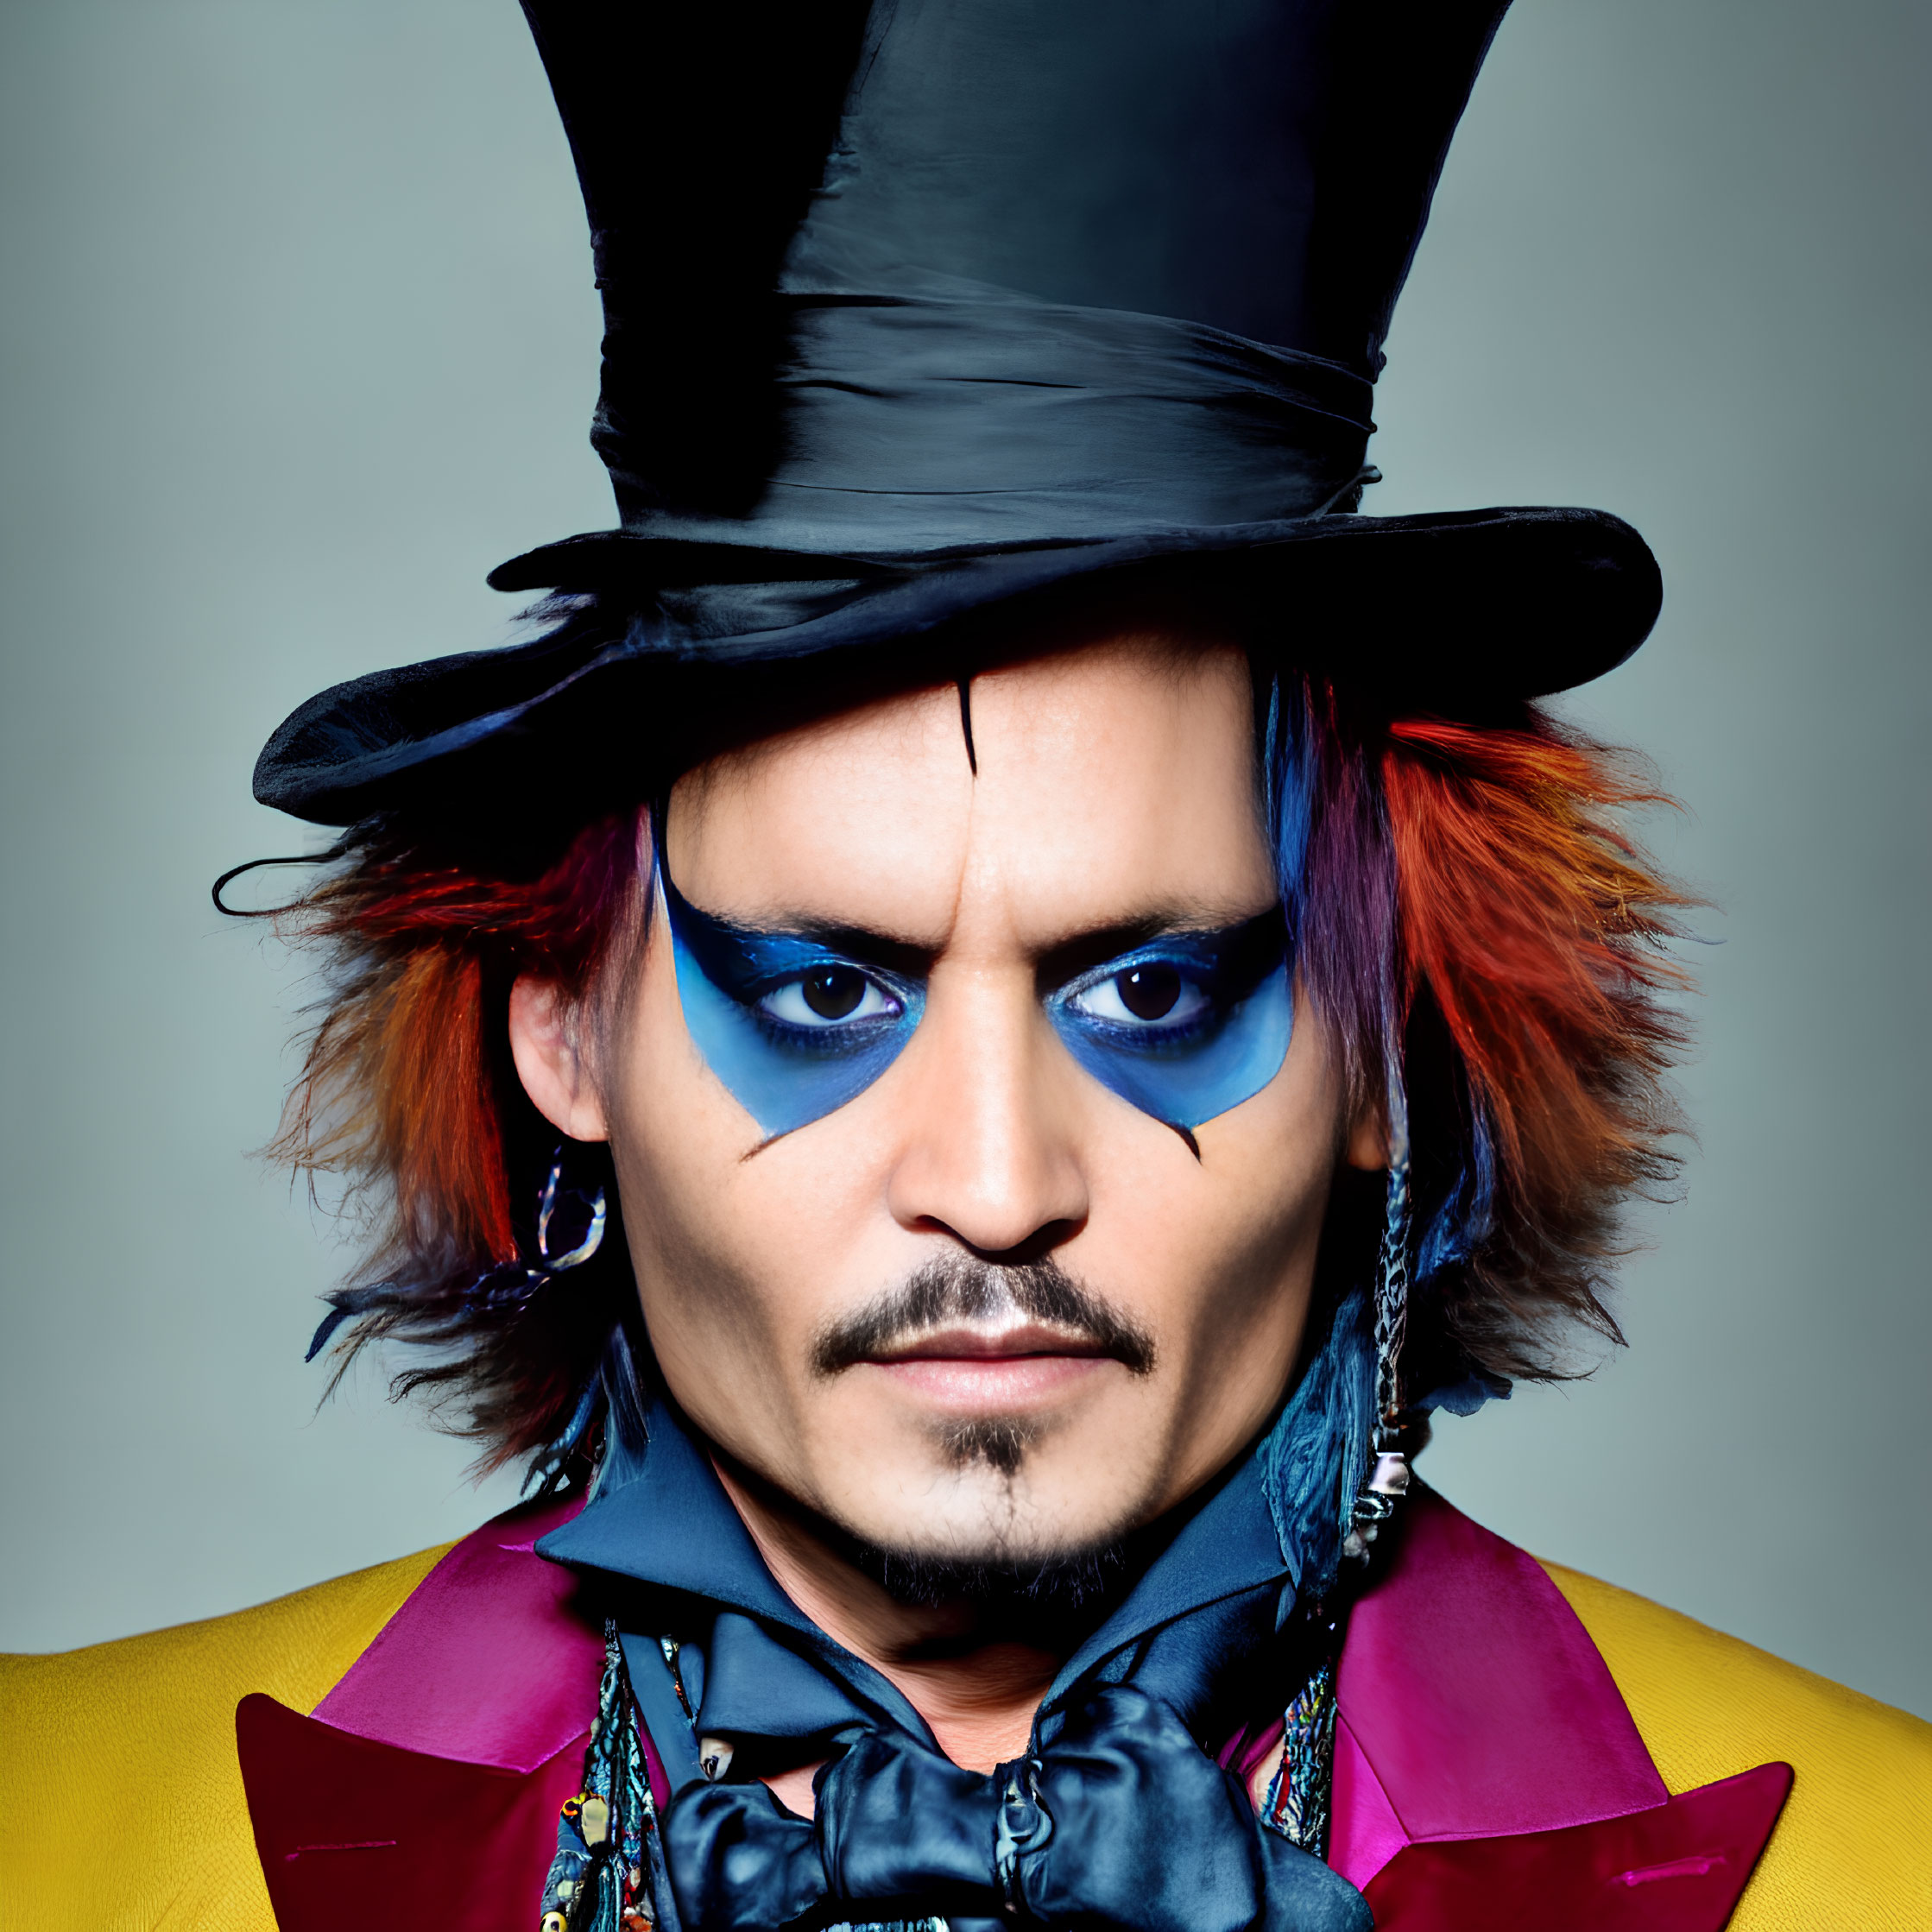 Person with Blue Eyeshadow in Colorful Attire and Top Hat